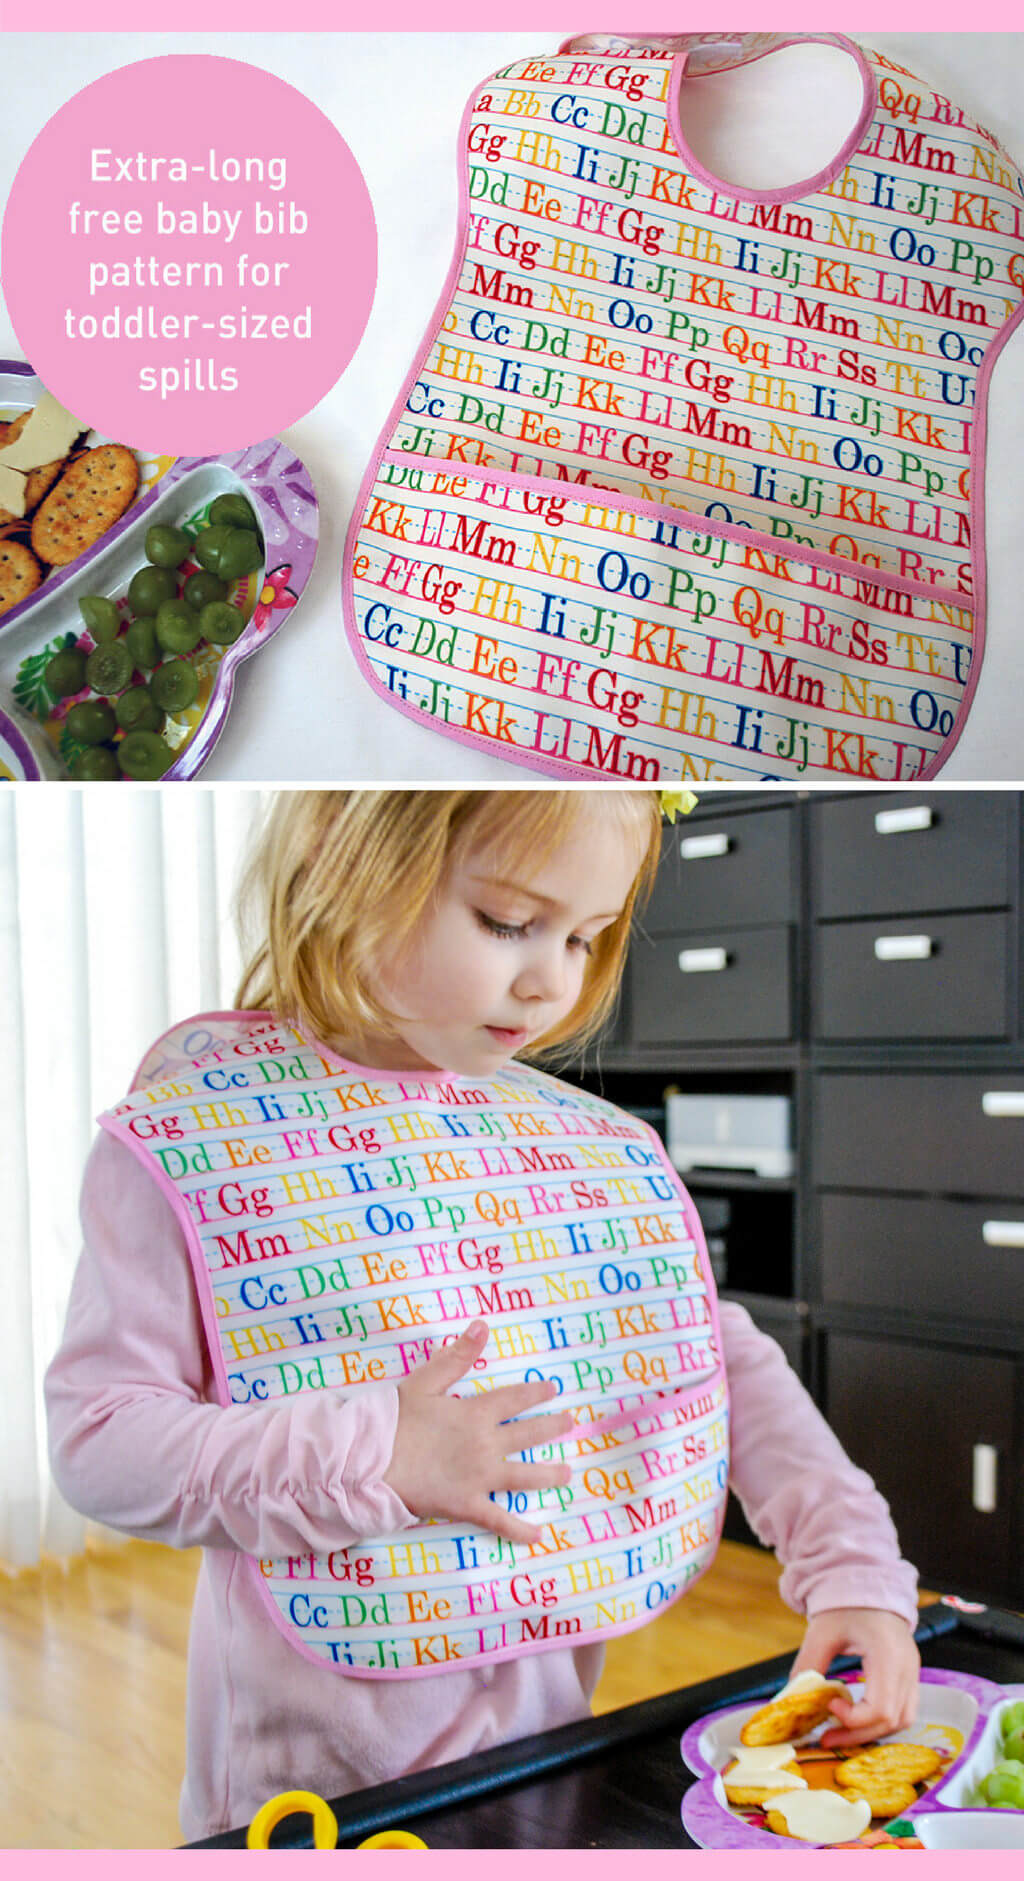 Extra-long baby bib free sewing pattern - long bib with large pocket for toddlers